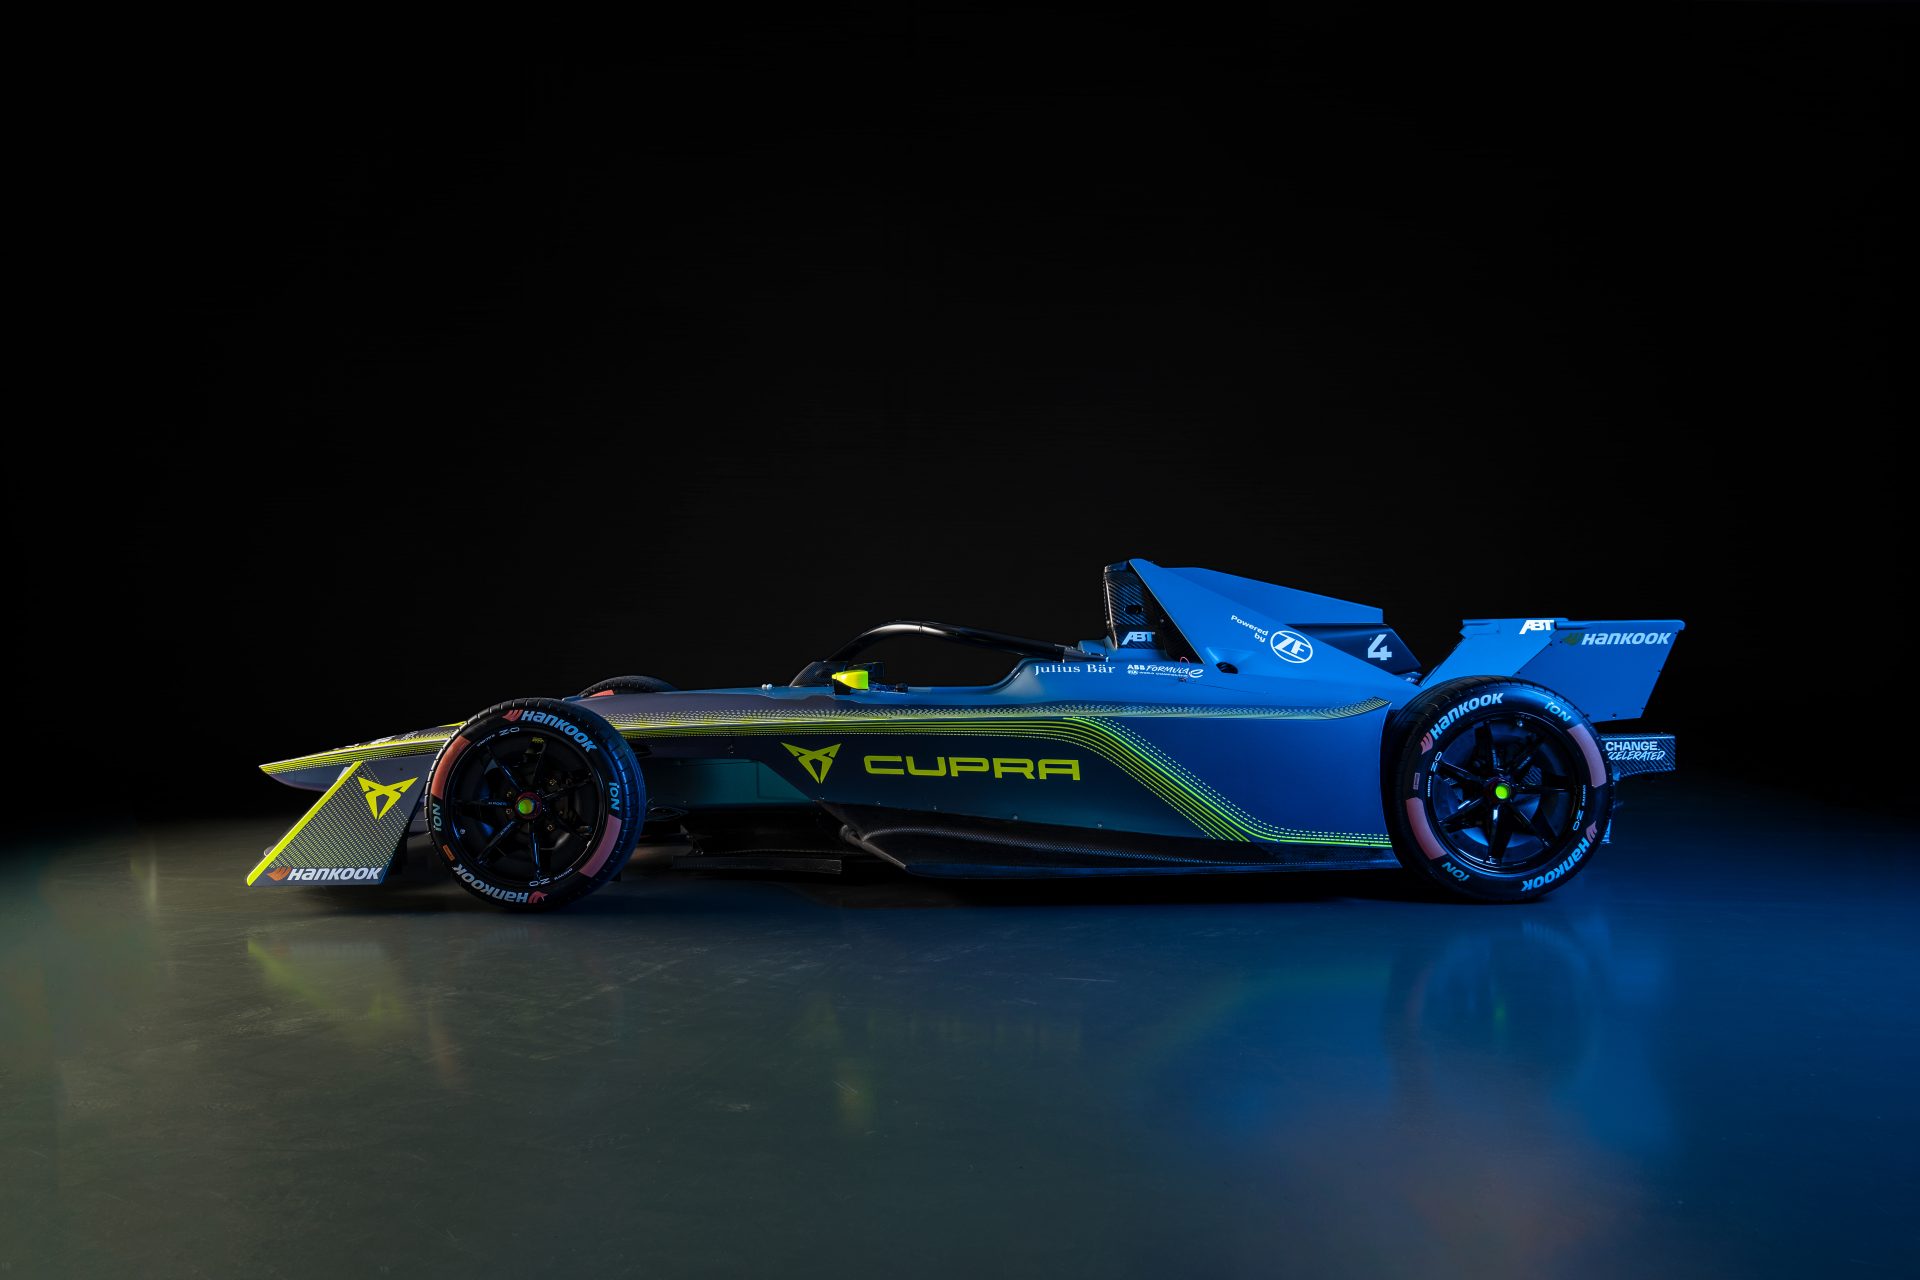 Cupra Further Strengthens Its Commitment To Electric Motorsport As It Joins Abt To Compete In Formula E 04 Hq